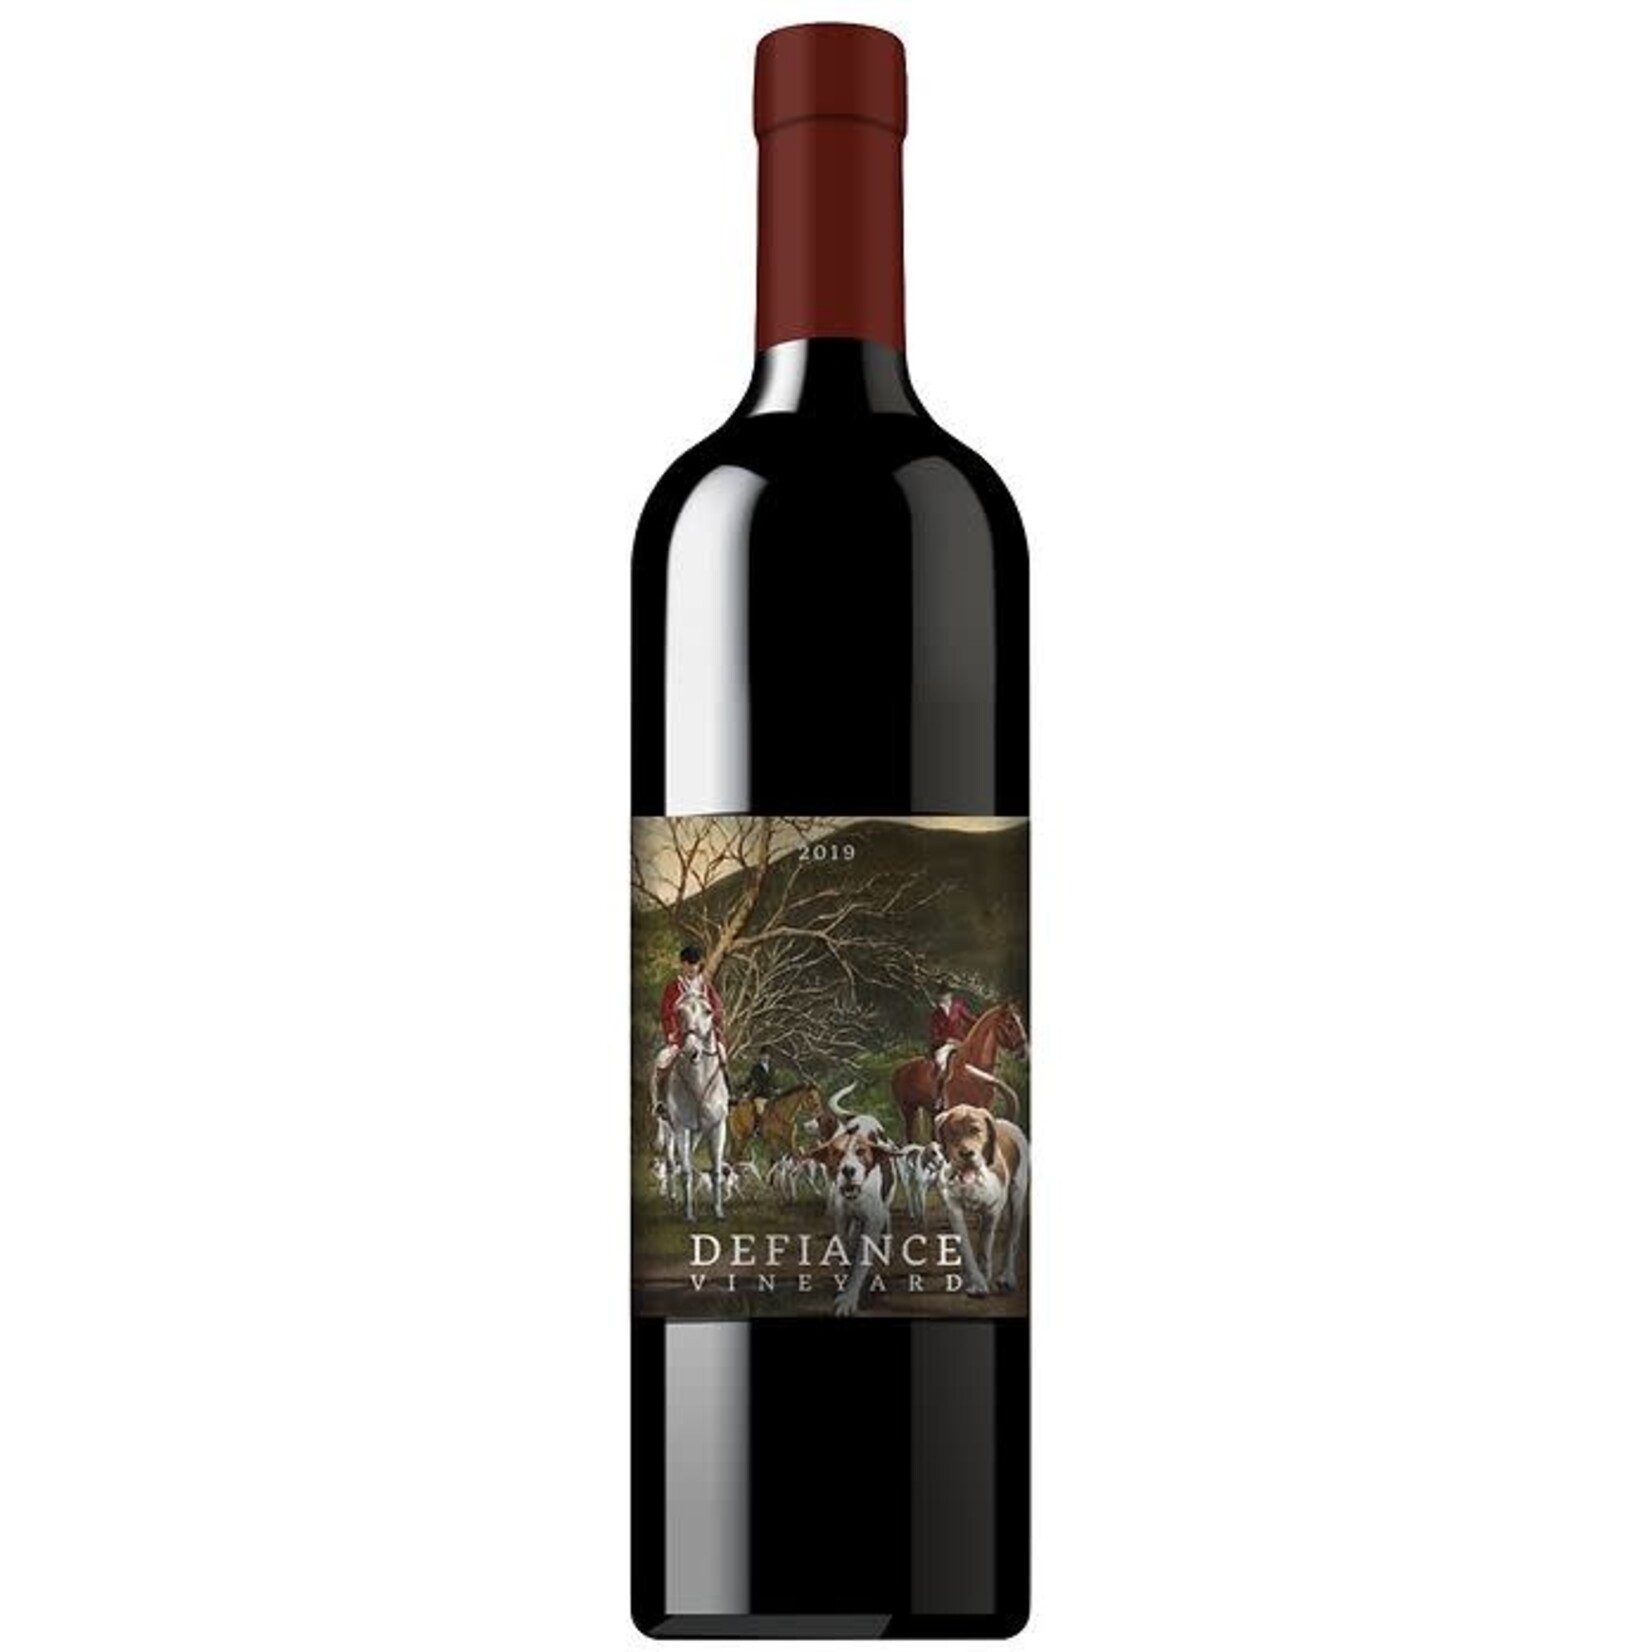 Defiance Defiance Vineyard Whipper-In Red Blend 2019 Paso Robles  California